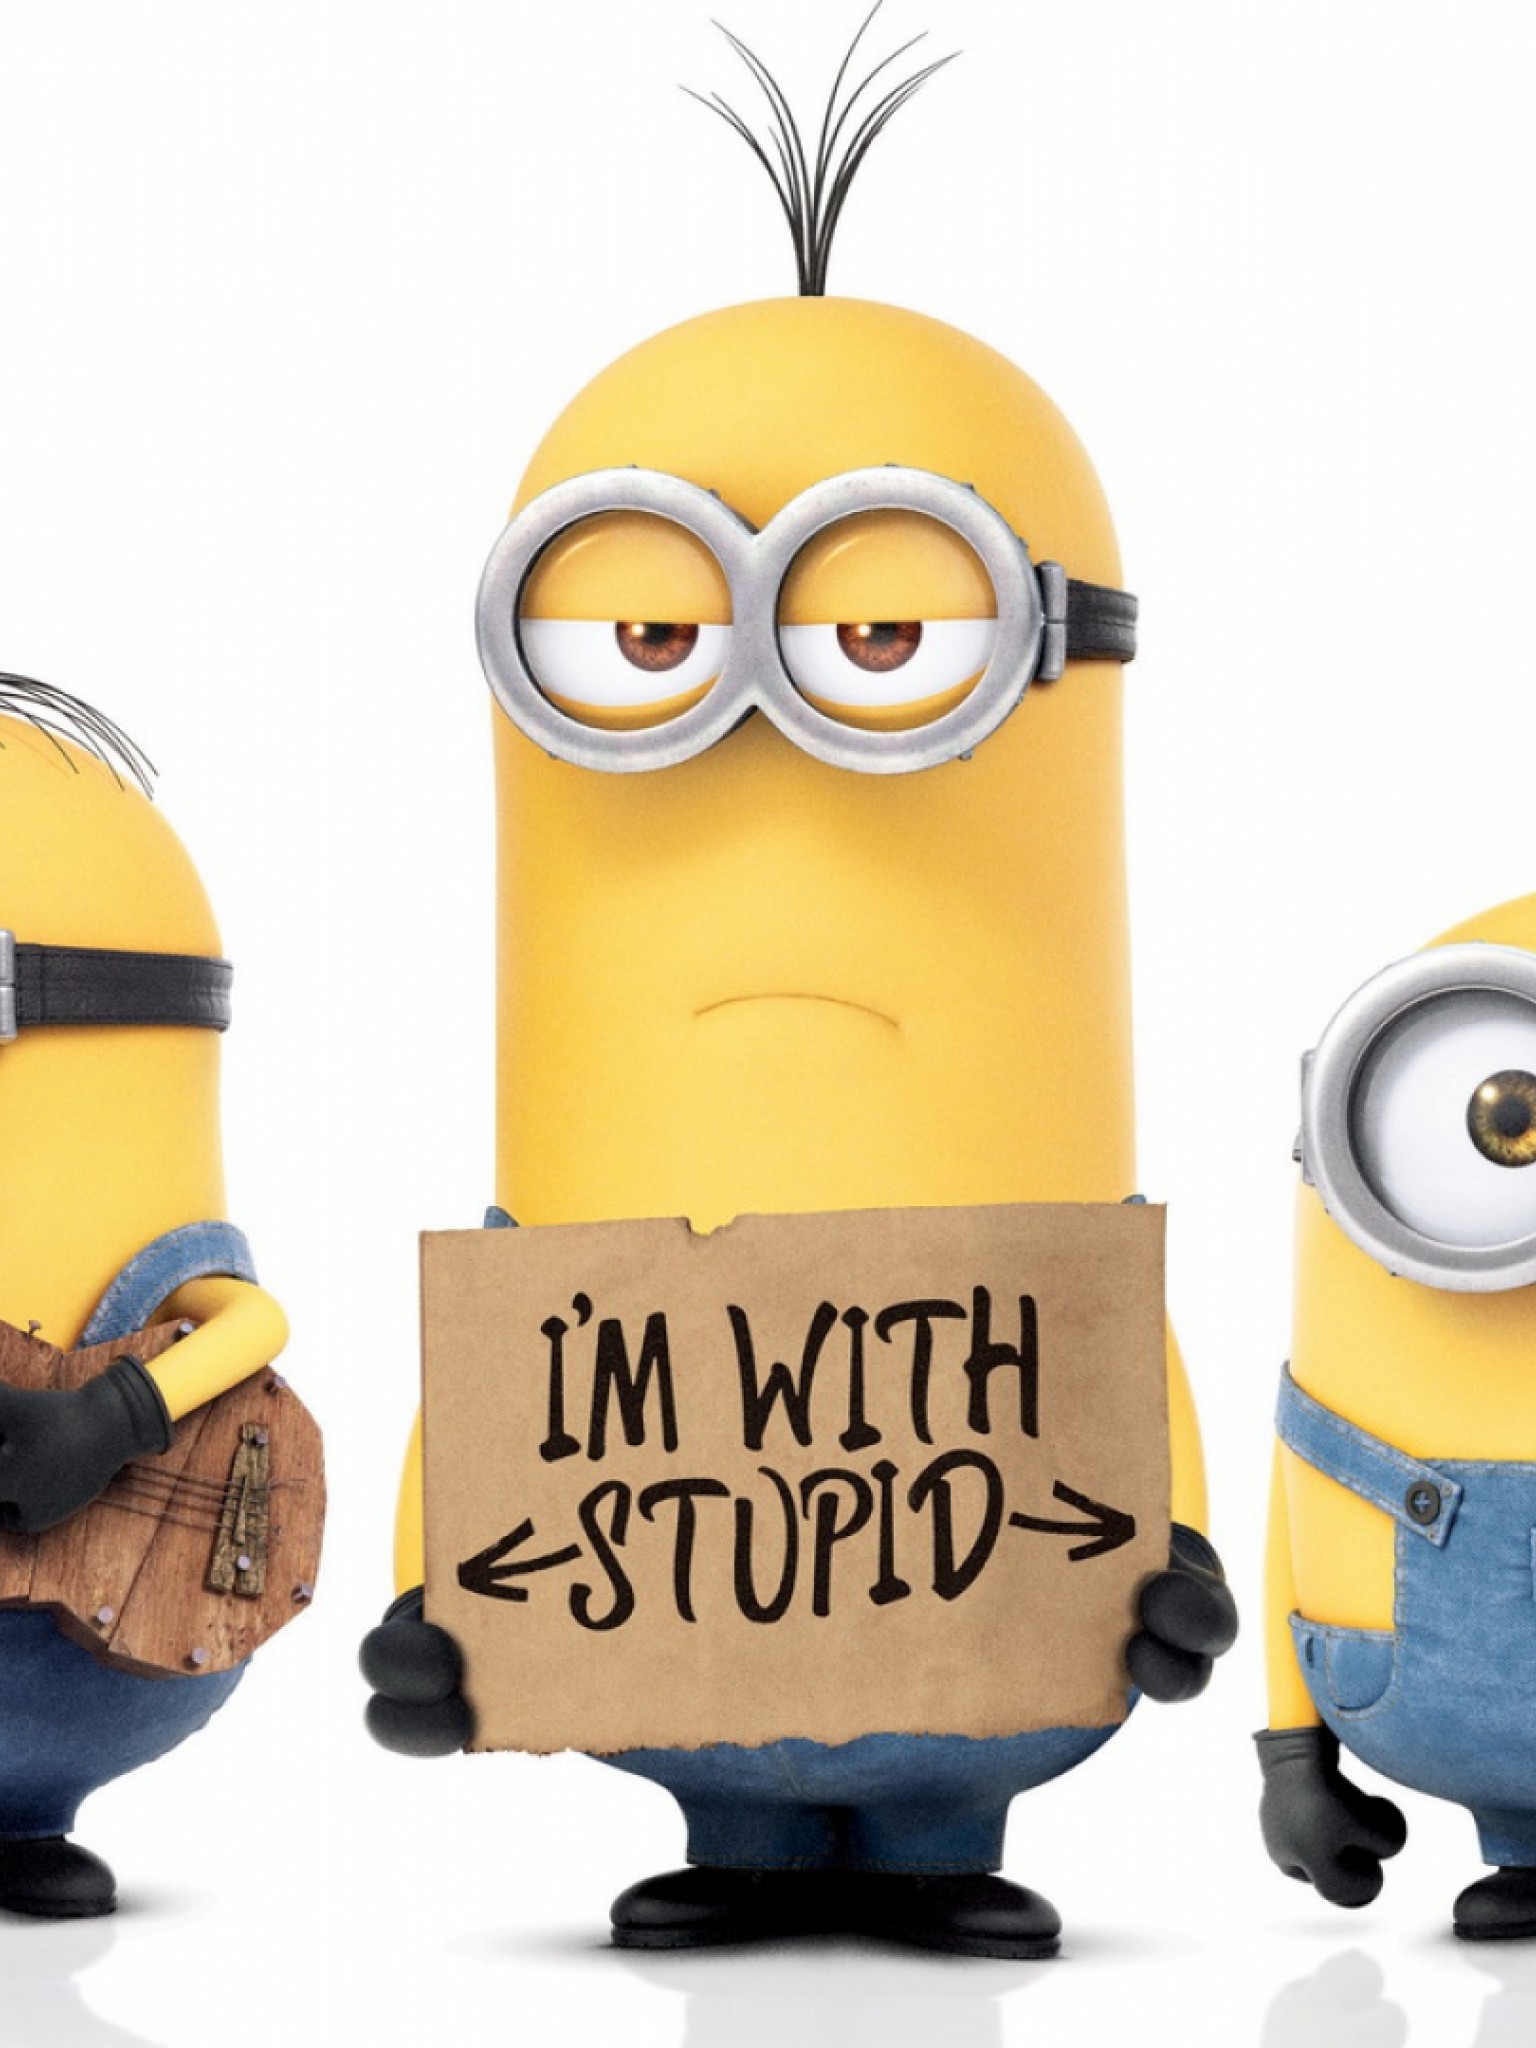 Cute Minions Background Hd Wallpaper For Desktop And Mobiles Retina